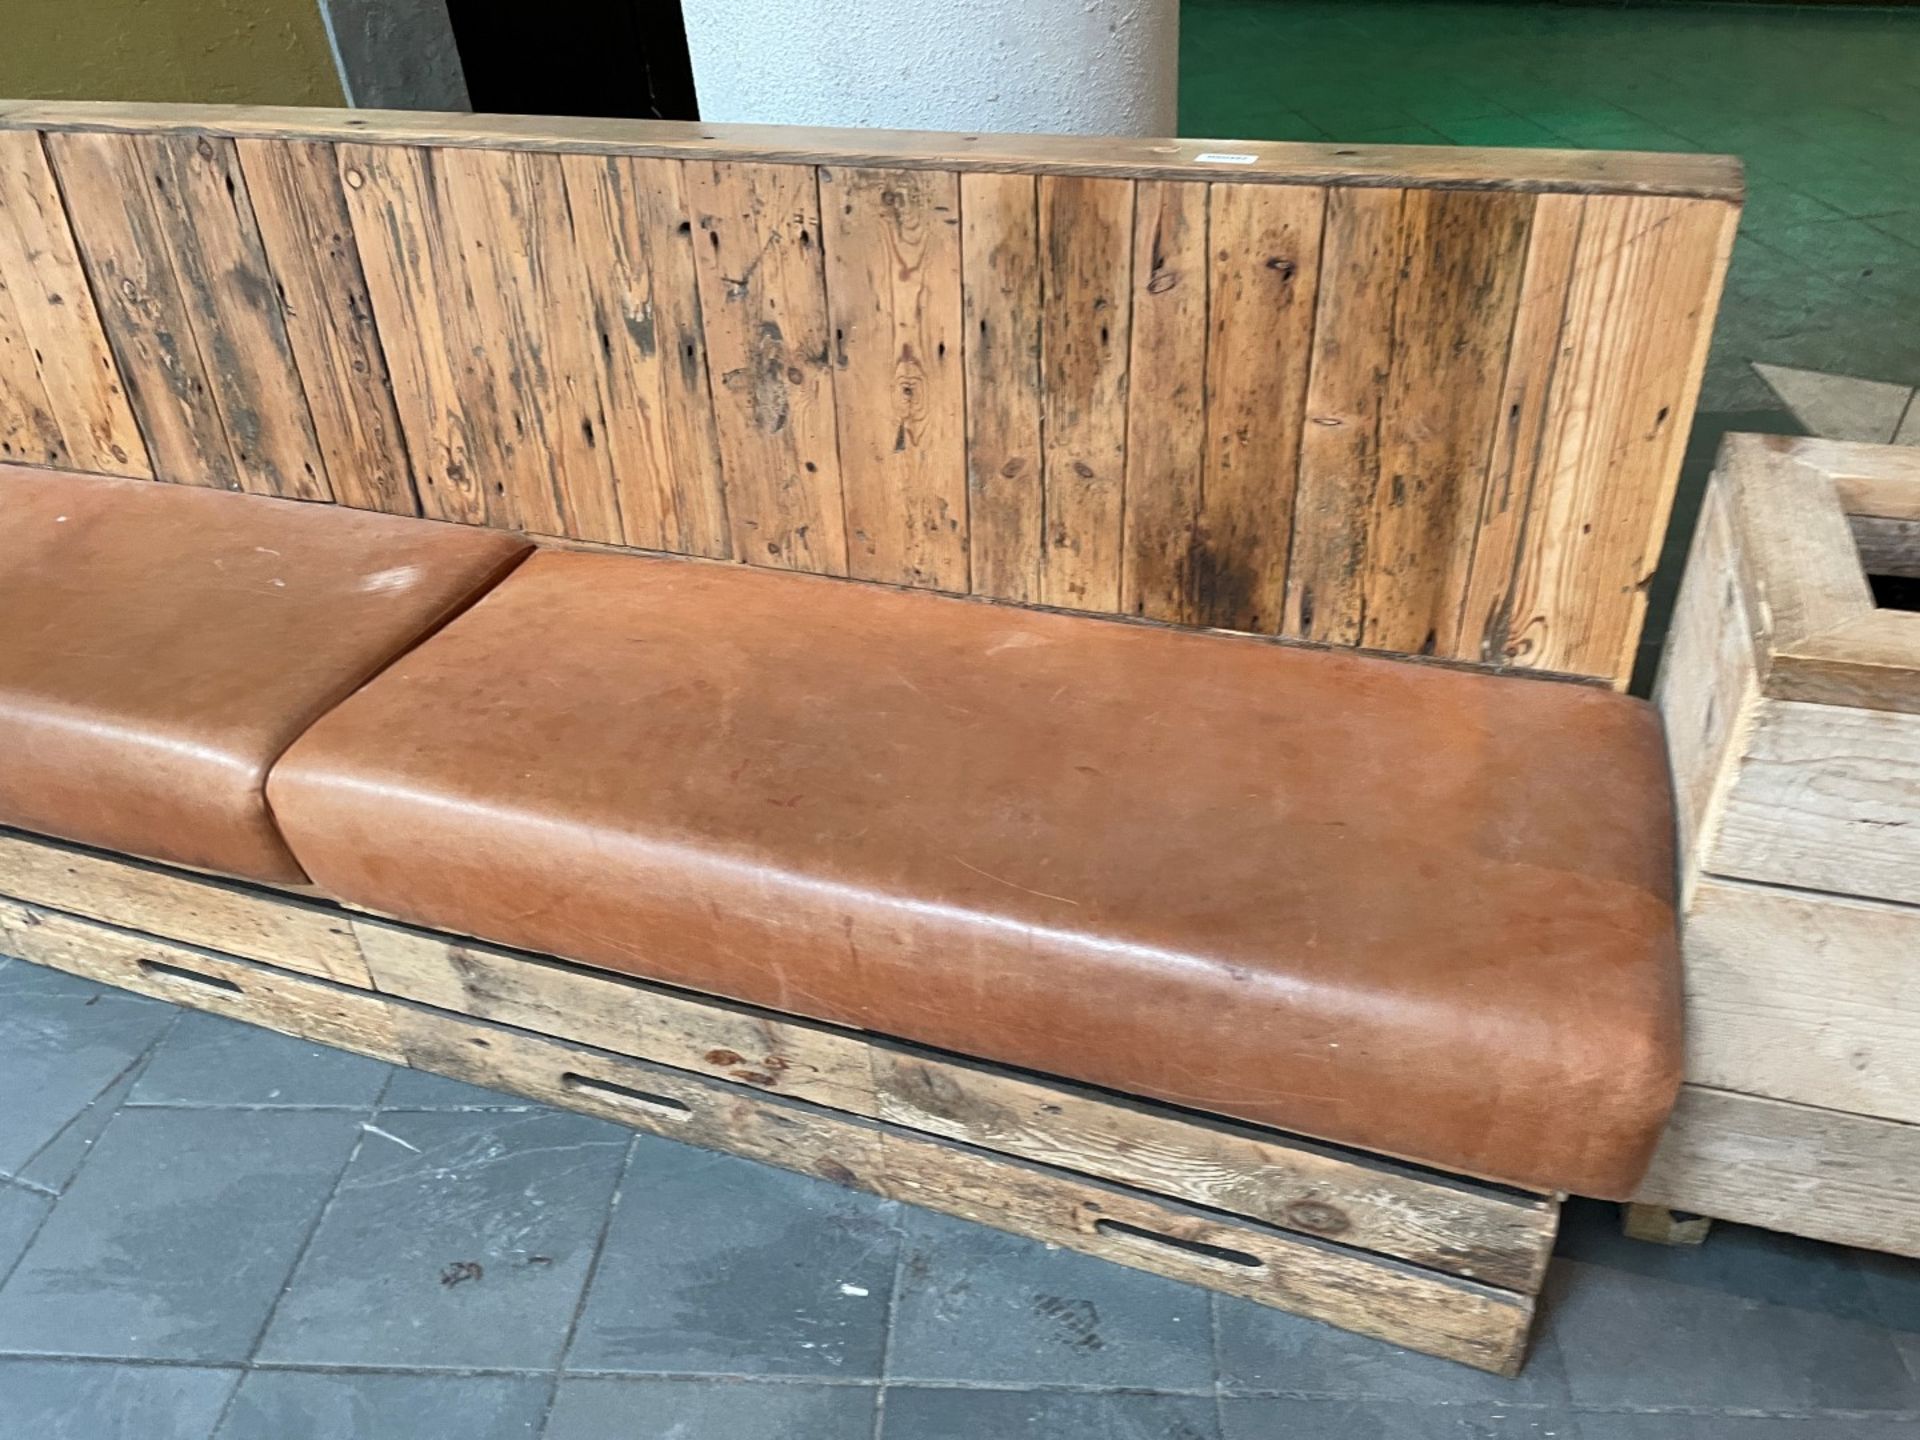 1 x Rustic Wooden Seating Bench Featuring Tan Leather Seat Pads - Suitable For Restaurants or Bars! - Image 2 of 12